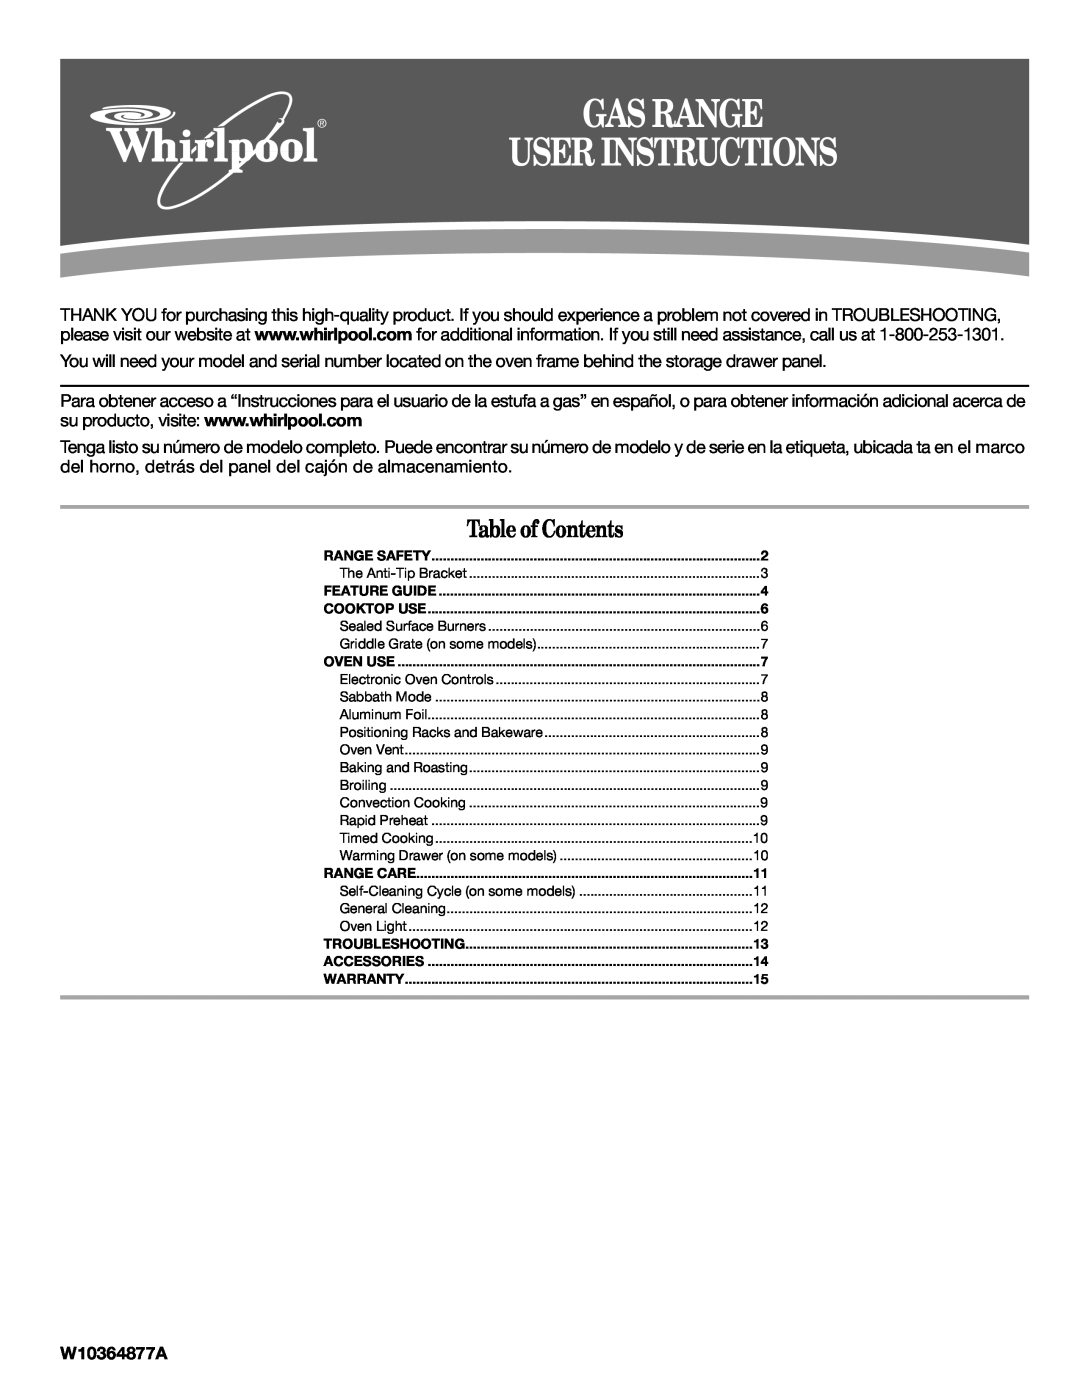 Whirlpool gas range warranty User Instructions, Gas Range, Table of Contents, W10364877A 